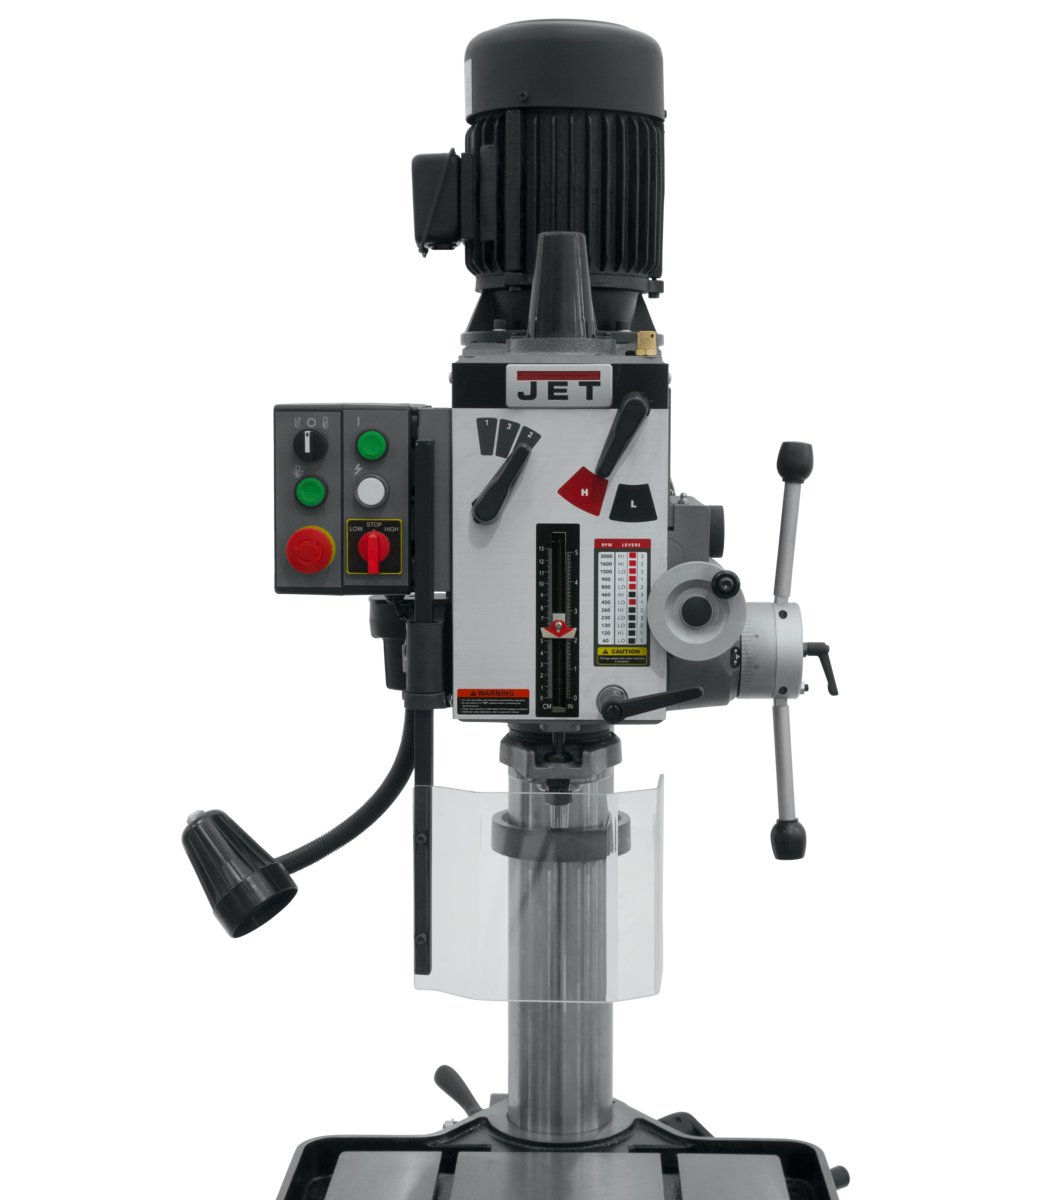 20" Geared Head Tapping Drill Press with Power Downfeed - 230V | GHD-20PFT - Diamond Tool Store